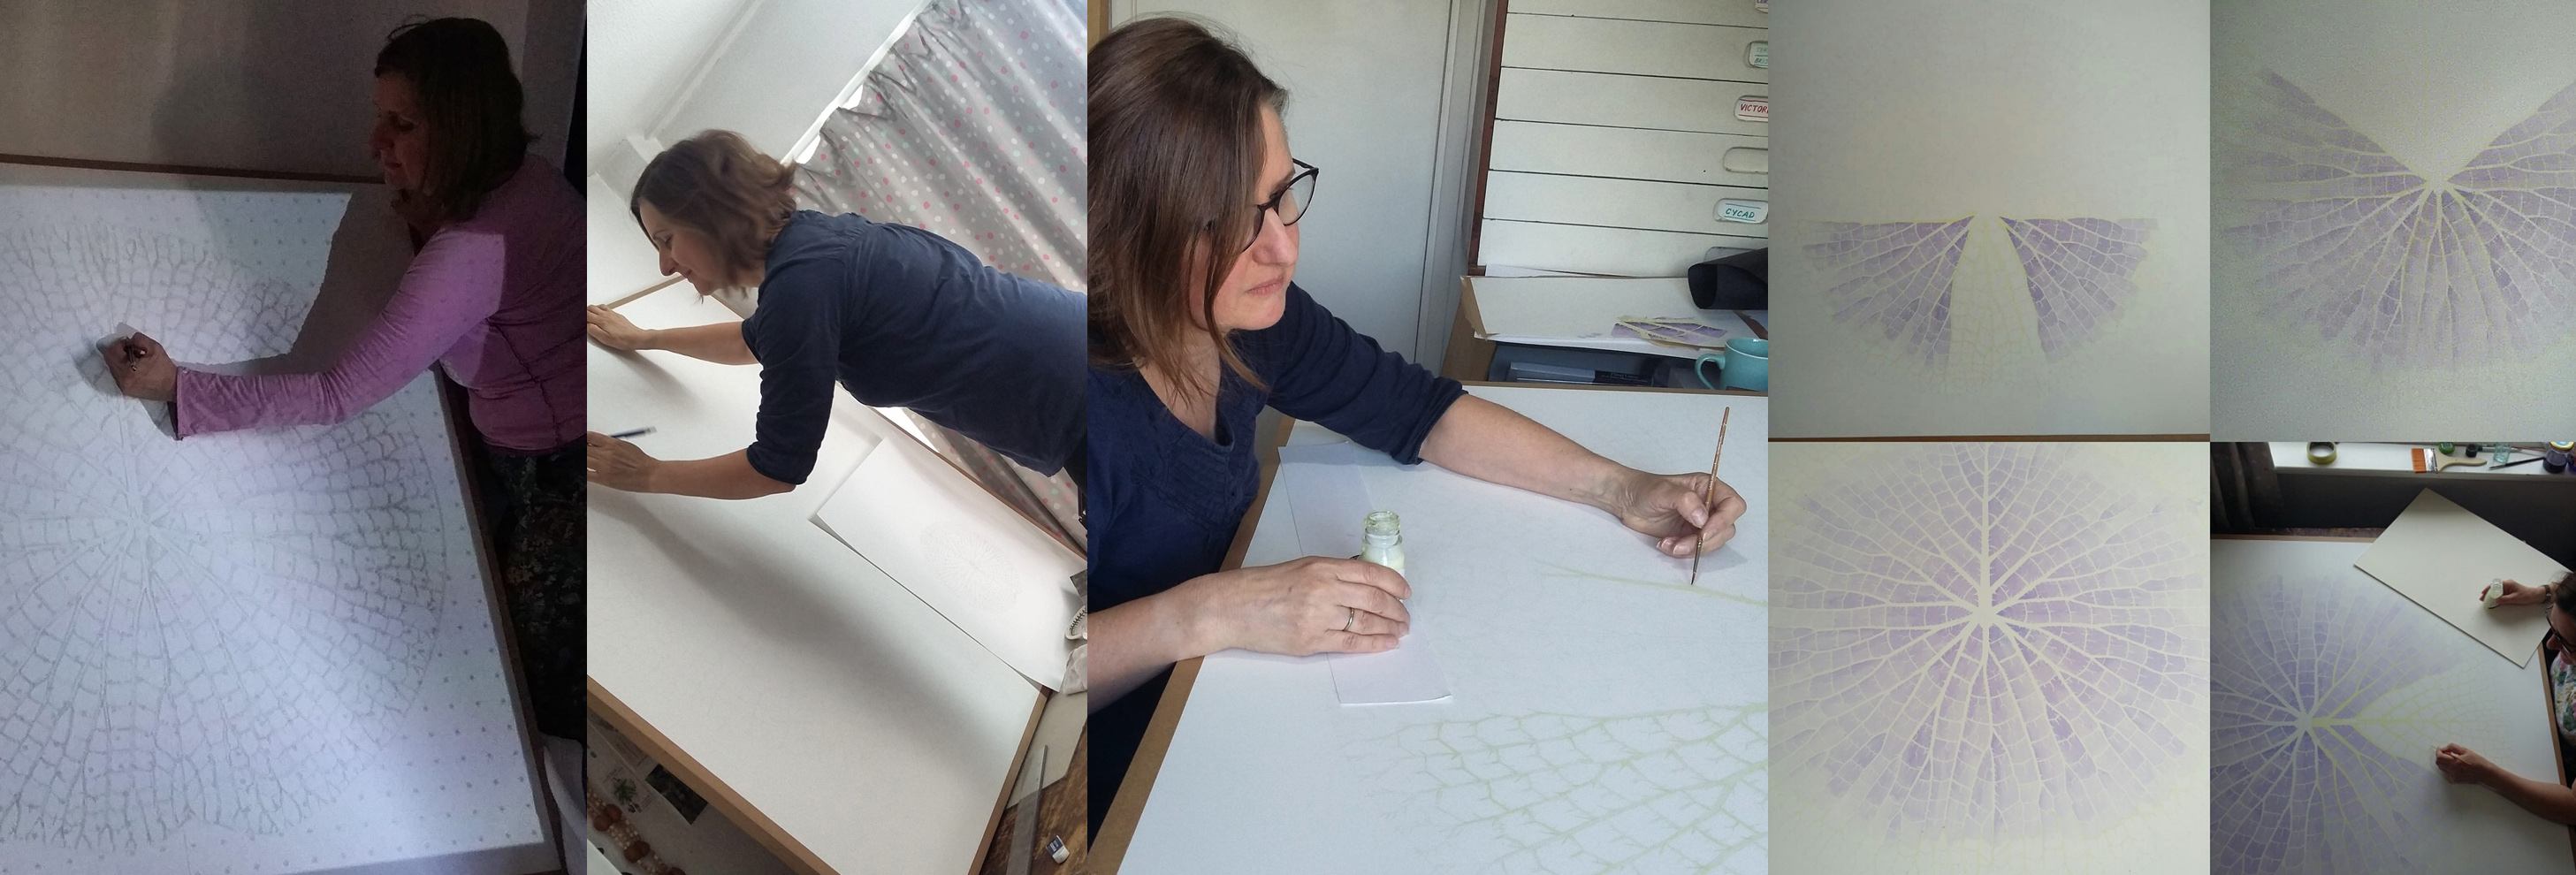 Collage of Lucy, a white woman with short brown hair, drawing, masking and starting to paint a large waterlily illustration over 1m wide